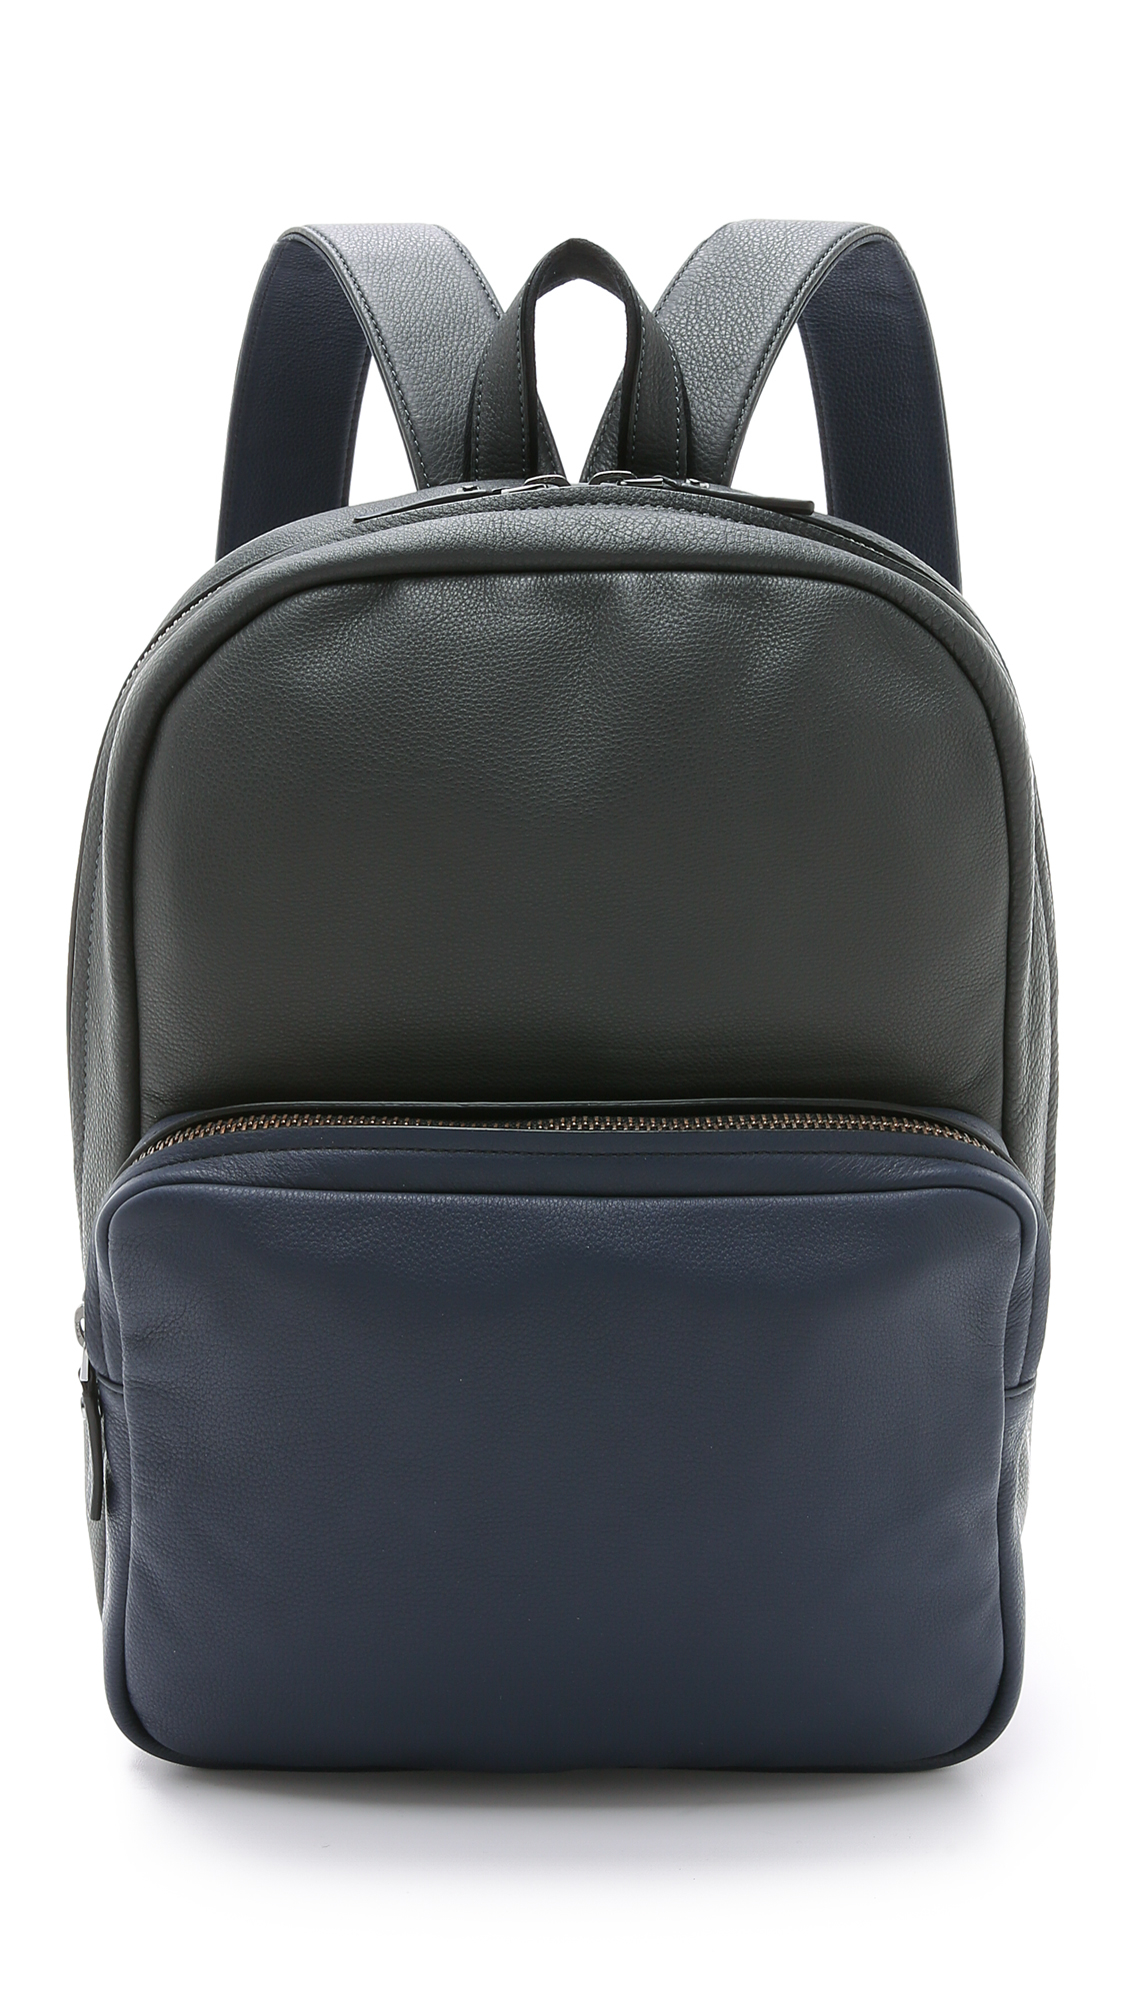 Lyst - Marc By Marc Jacobs Classic Leather Colorblock Backpack in Black